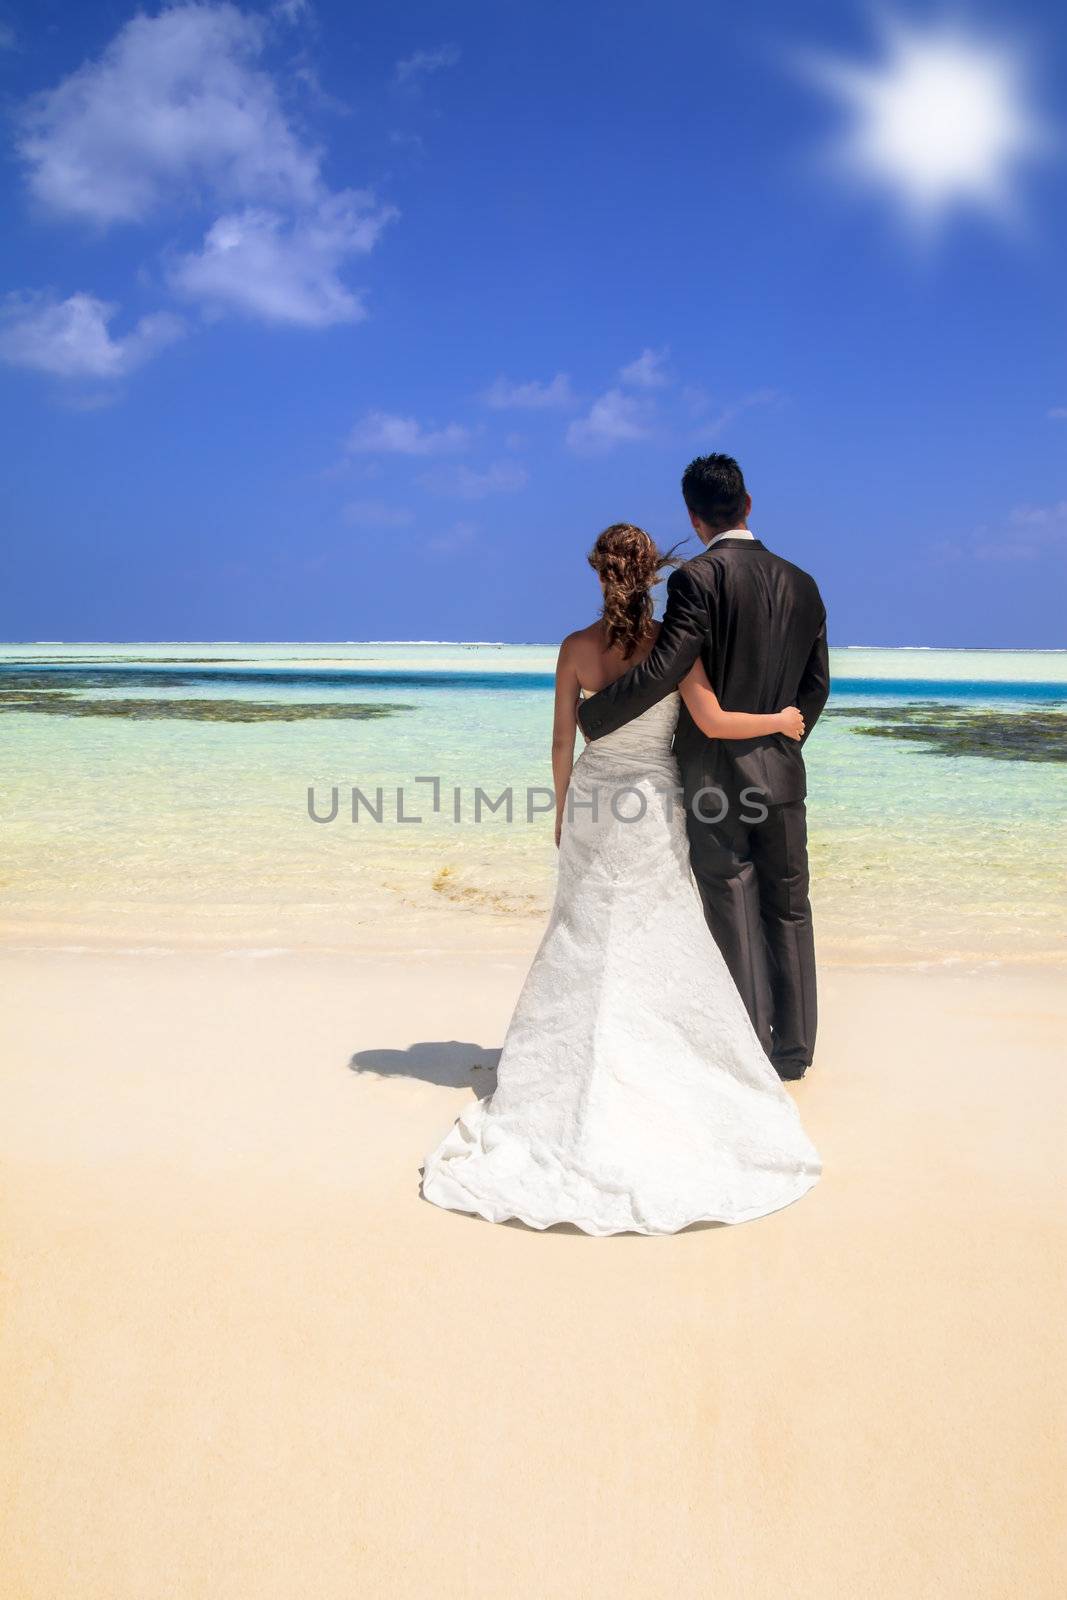 Bride and groom standing arm in arm facing away from the camera looking out over the ocean on an idyllic tropical beach